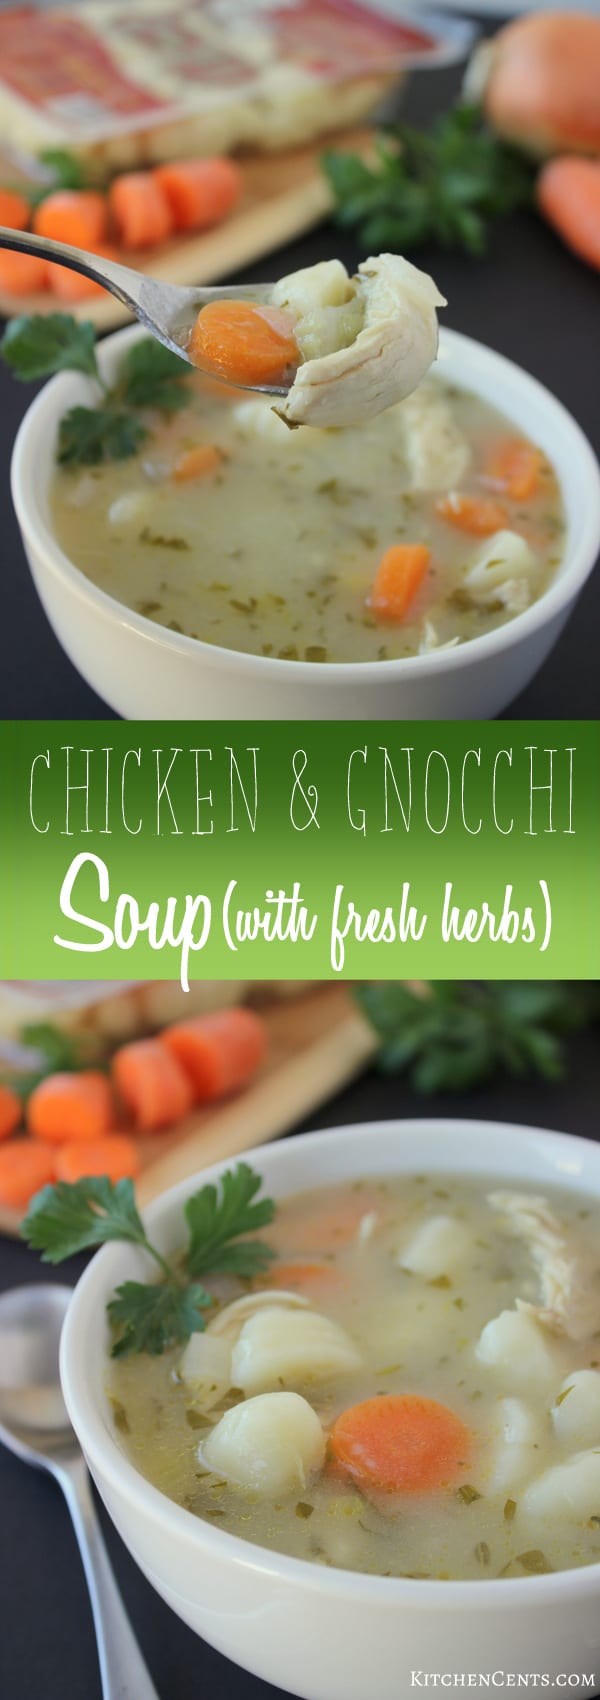 Chicken and Gnocchi Soup | KitchenCents.com